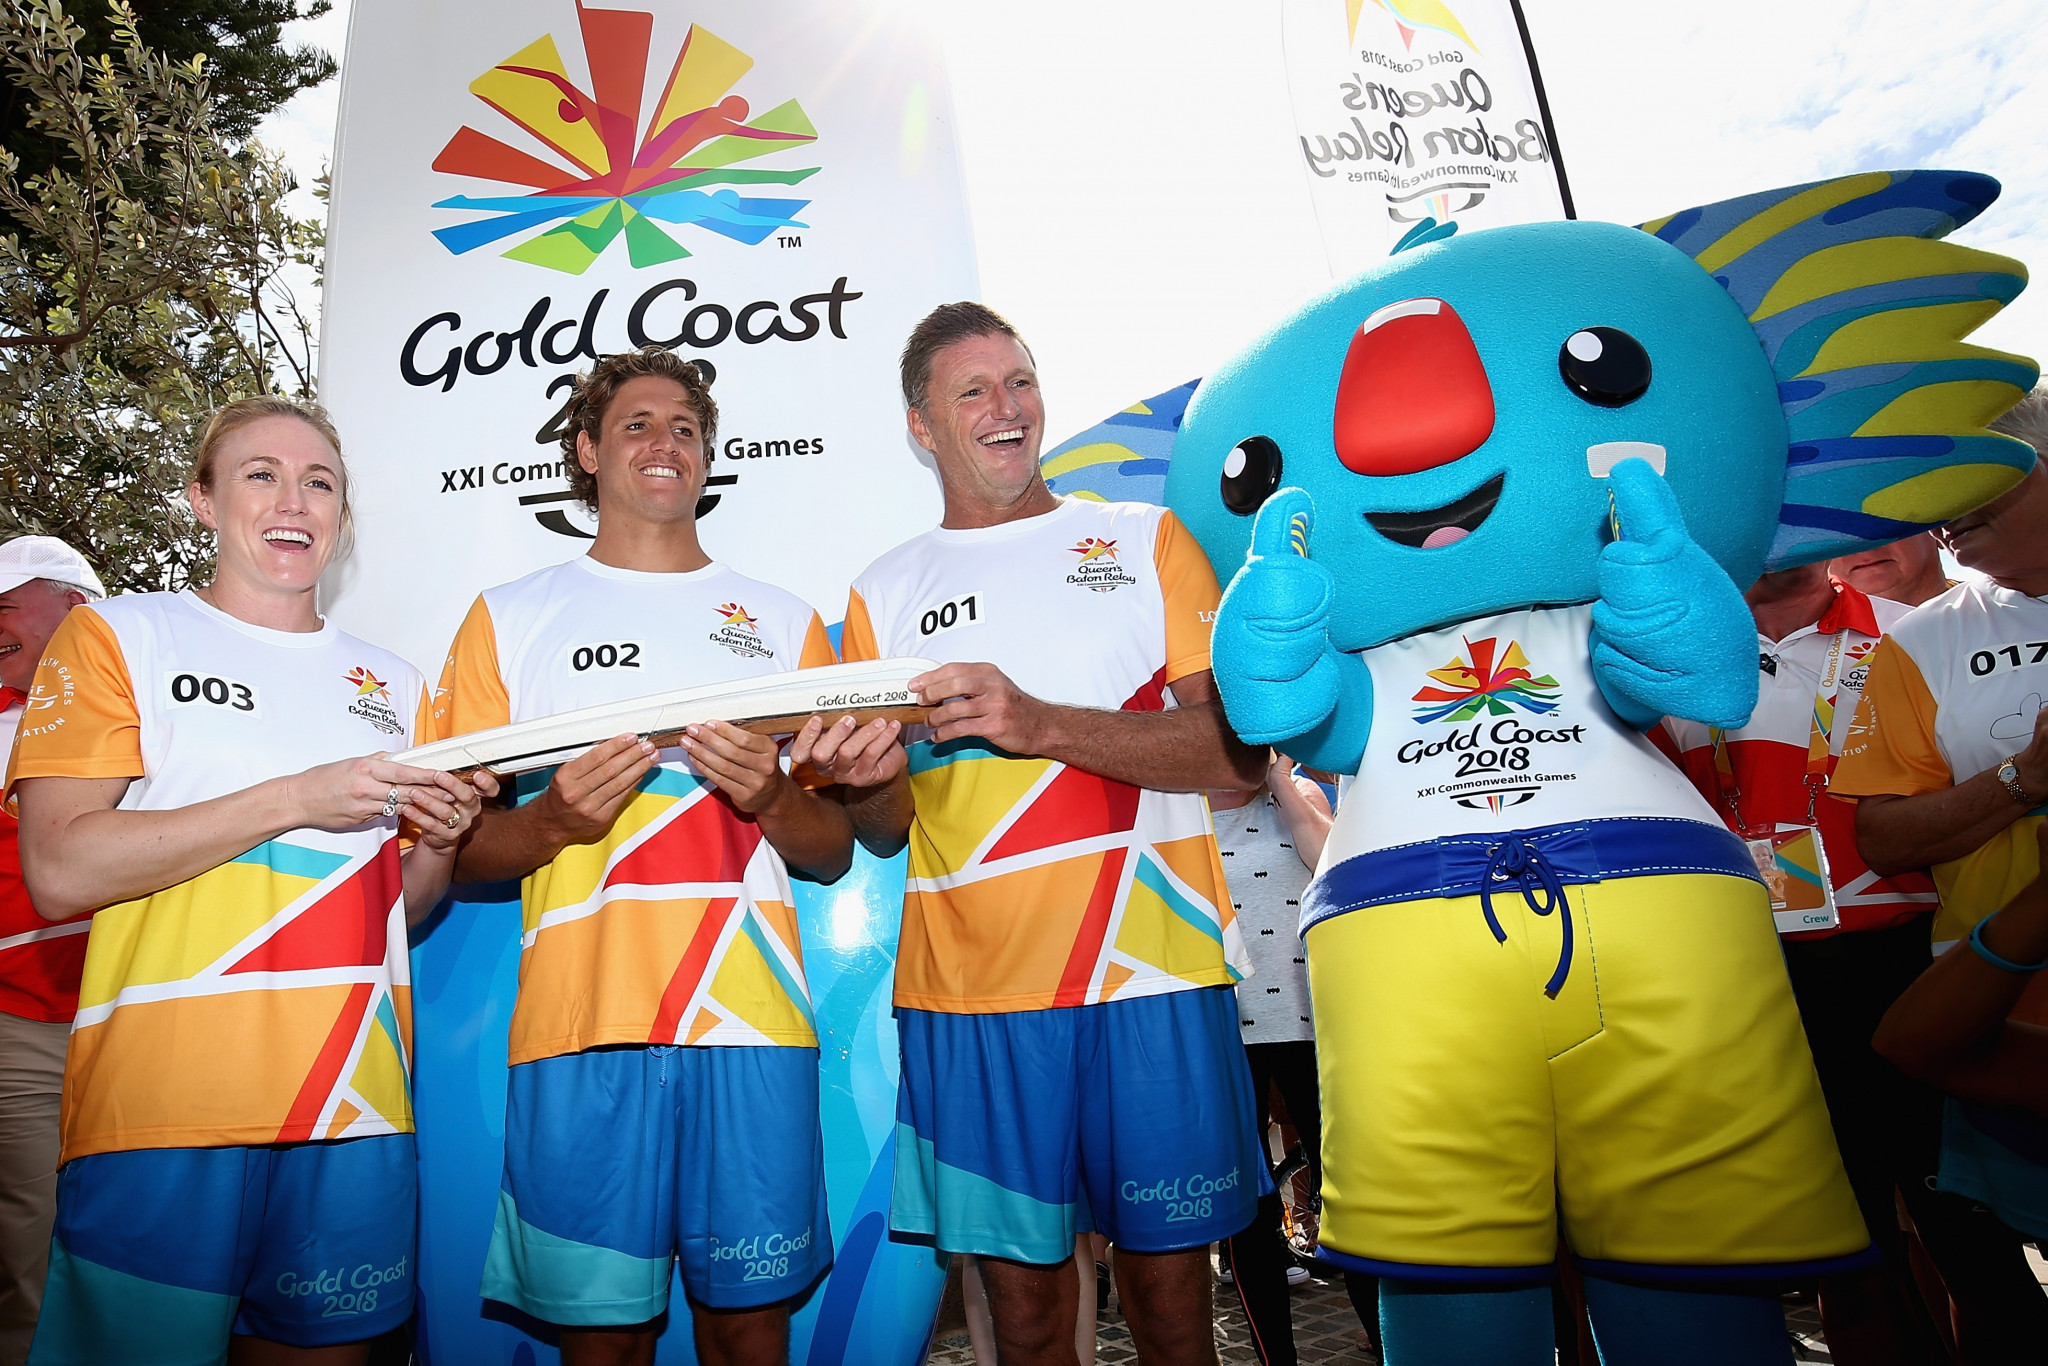 Queen's Baton Relay nears its conclusion with Gold Coast 2018 set to begin